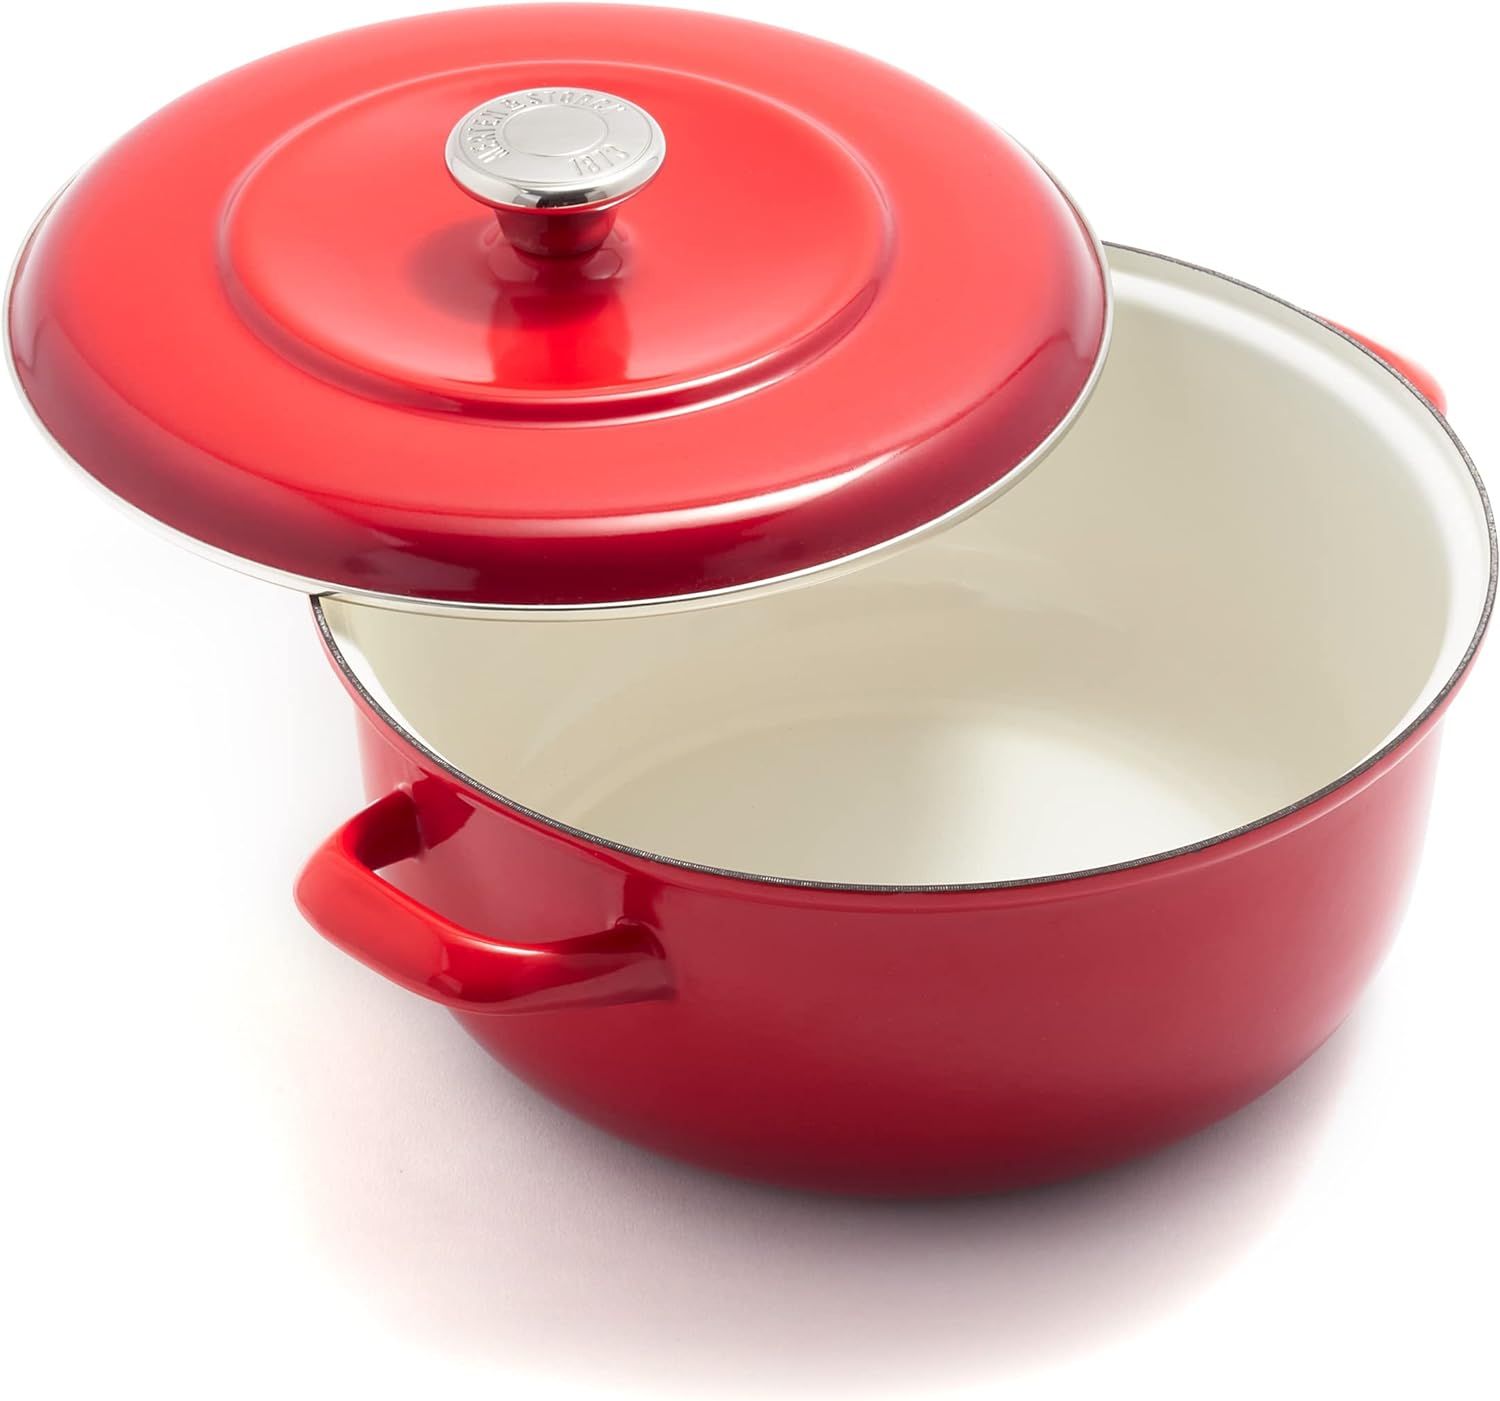 Merten and Storck German Enameled Iron 1873 Foundry Red Dutch Oven, 5.3QT | Amazon (US)